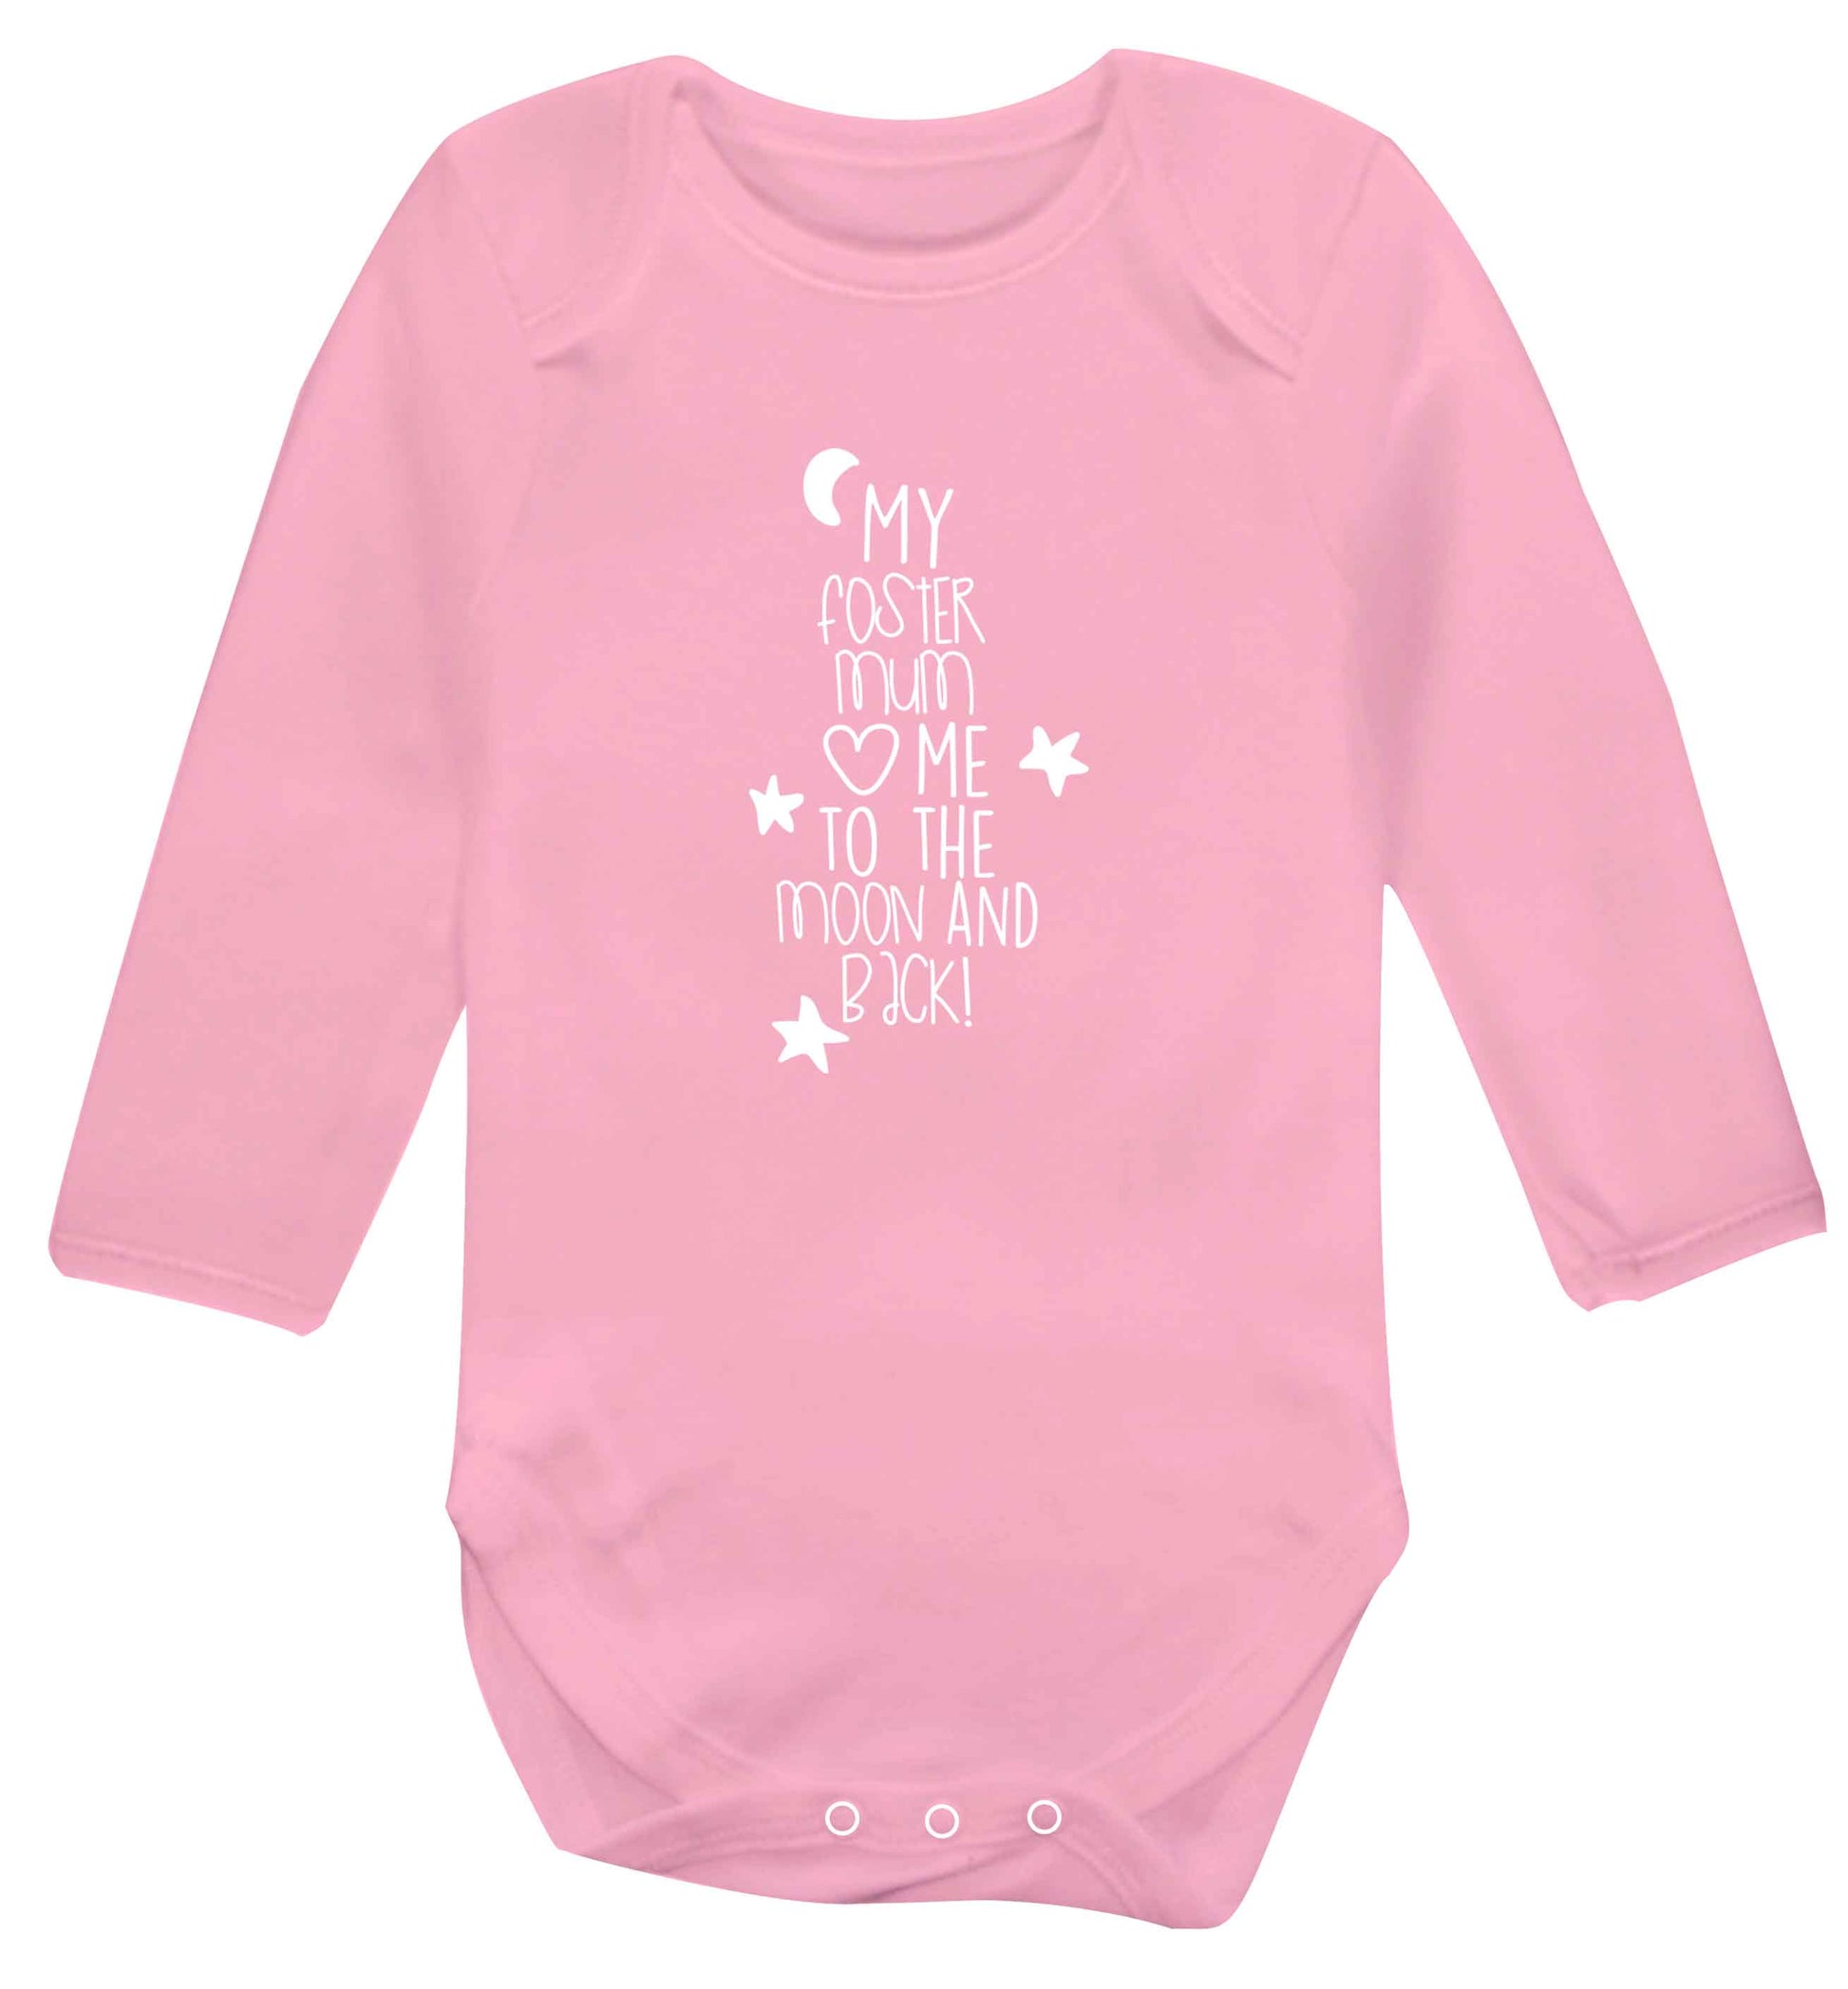 My foster mum loves me to the moon and back baby vest long sleeved pale pink 6-12 months